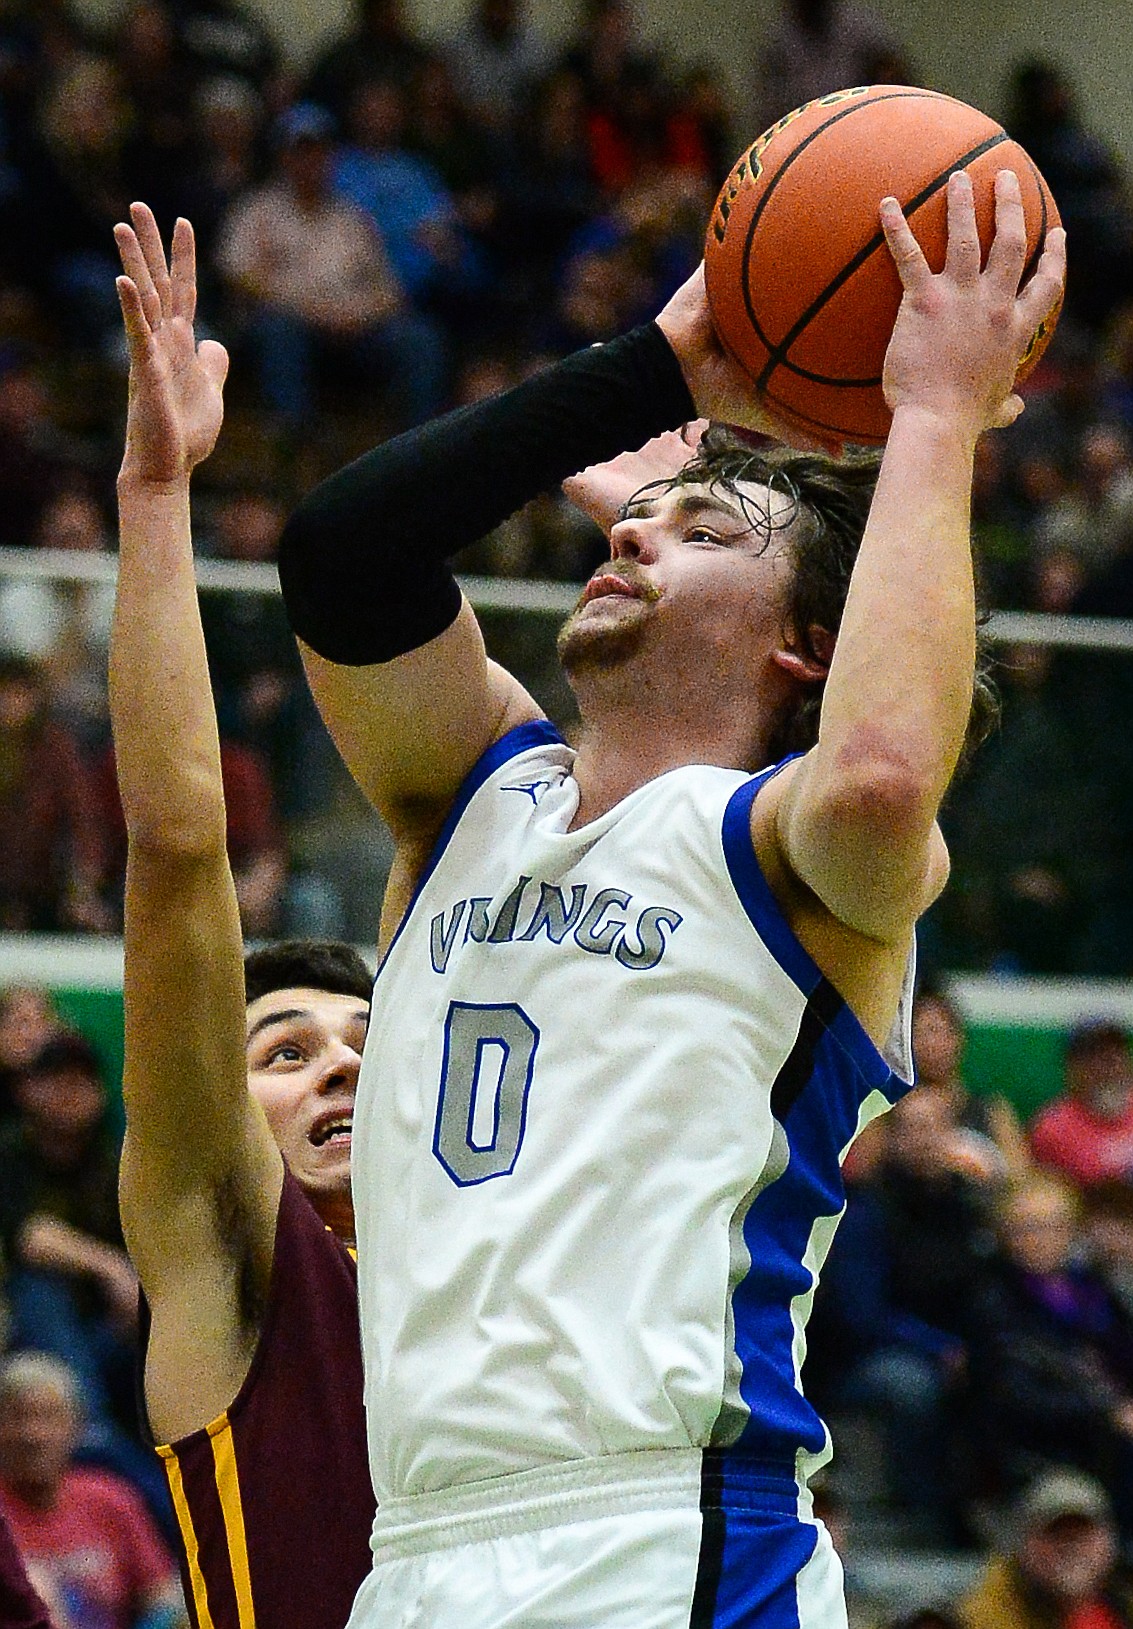 Bigfork's Anders Epperly (0) drives to the hoop past Poplar's Kenny Smoker (4) in the State Class B Boys' Basketball Tournament at the Belgrade Special Events Center in Belgrade on Thursday. (Casey Kreider/Daily Inter Lake)